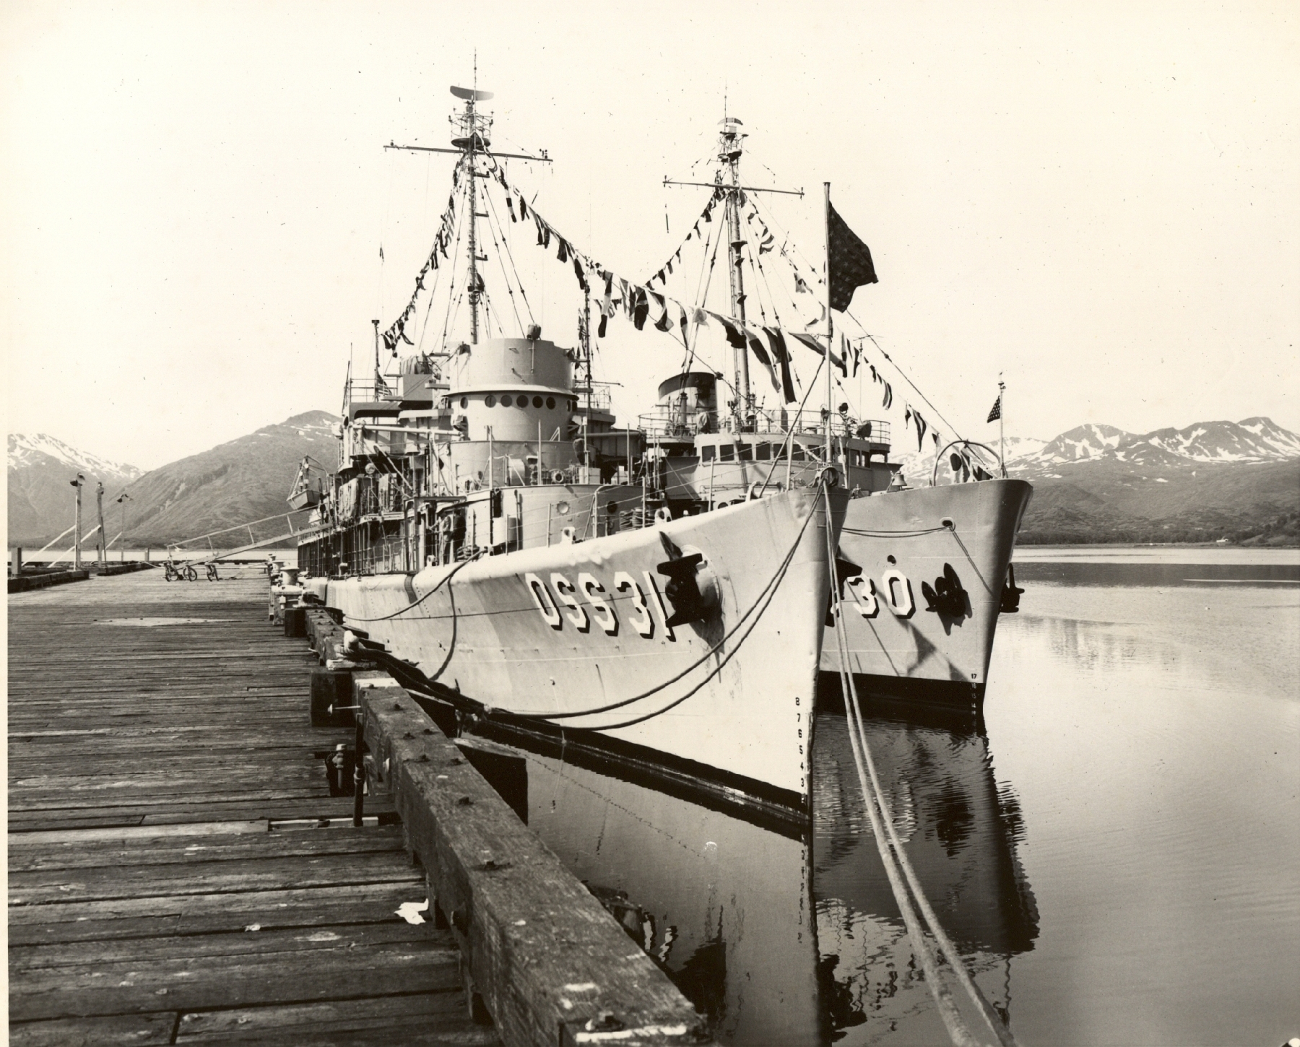 PATHFINDER tied up outboard of PIONEER at Kodiak